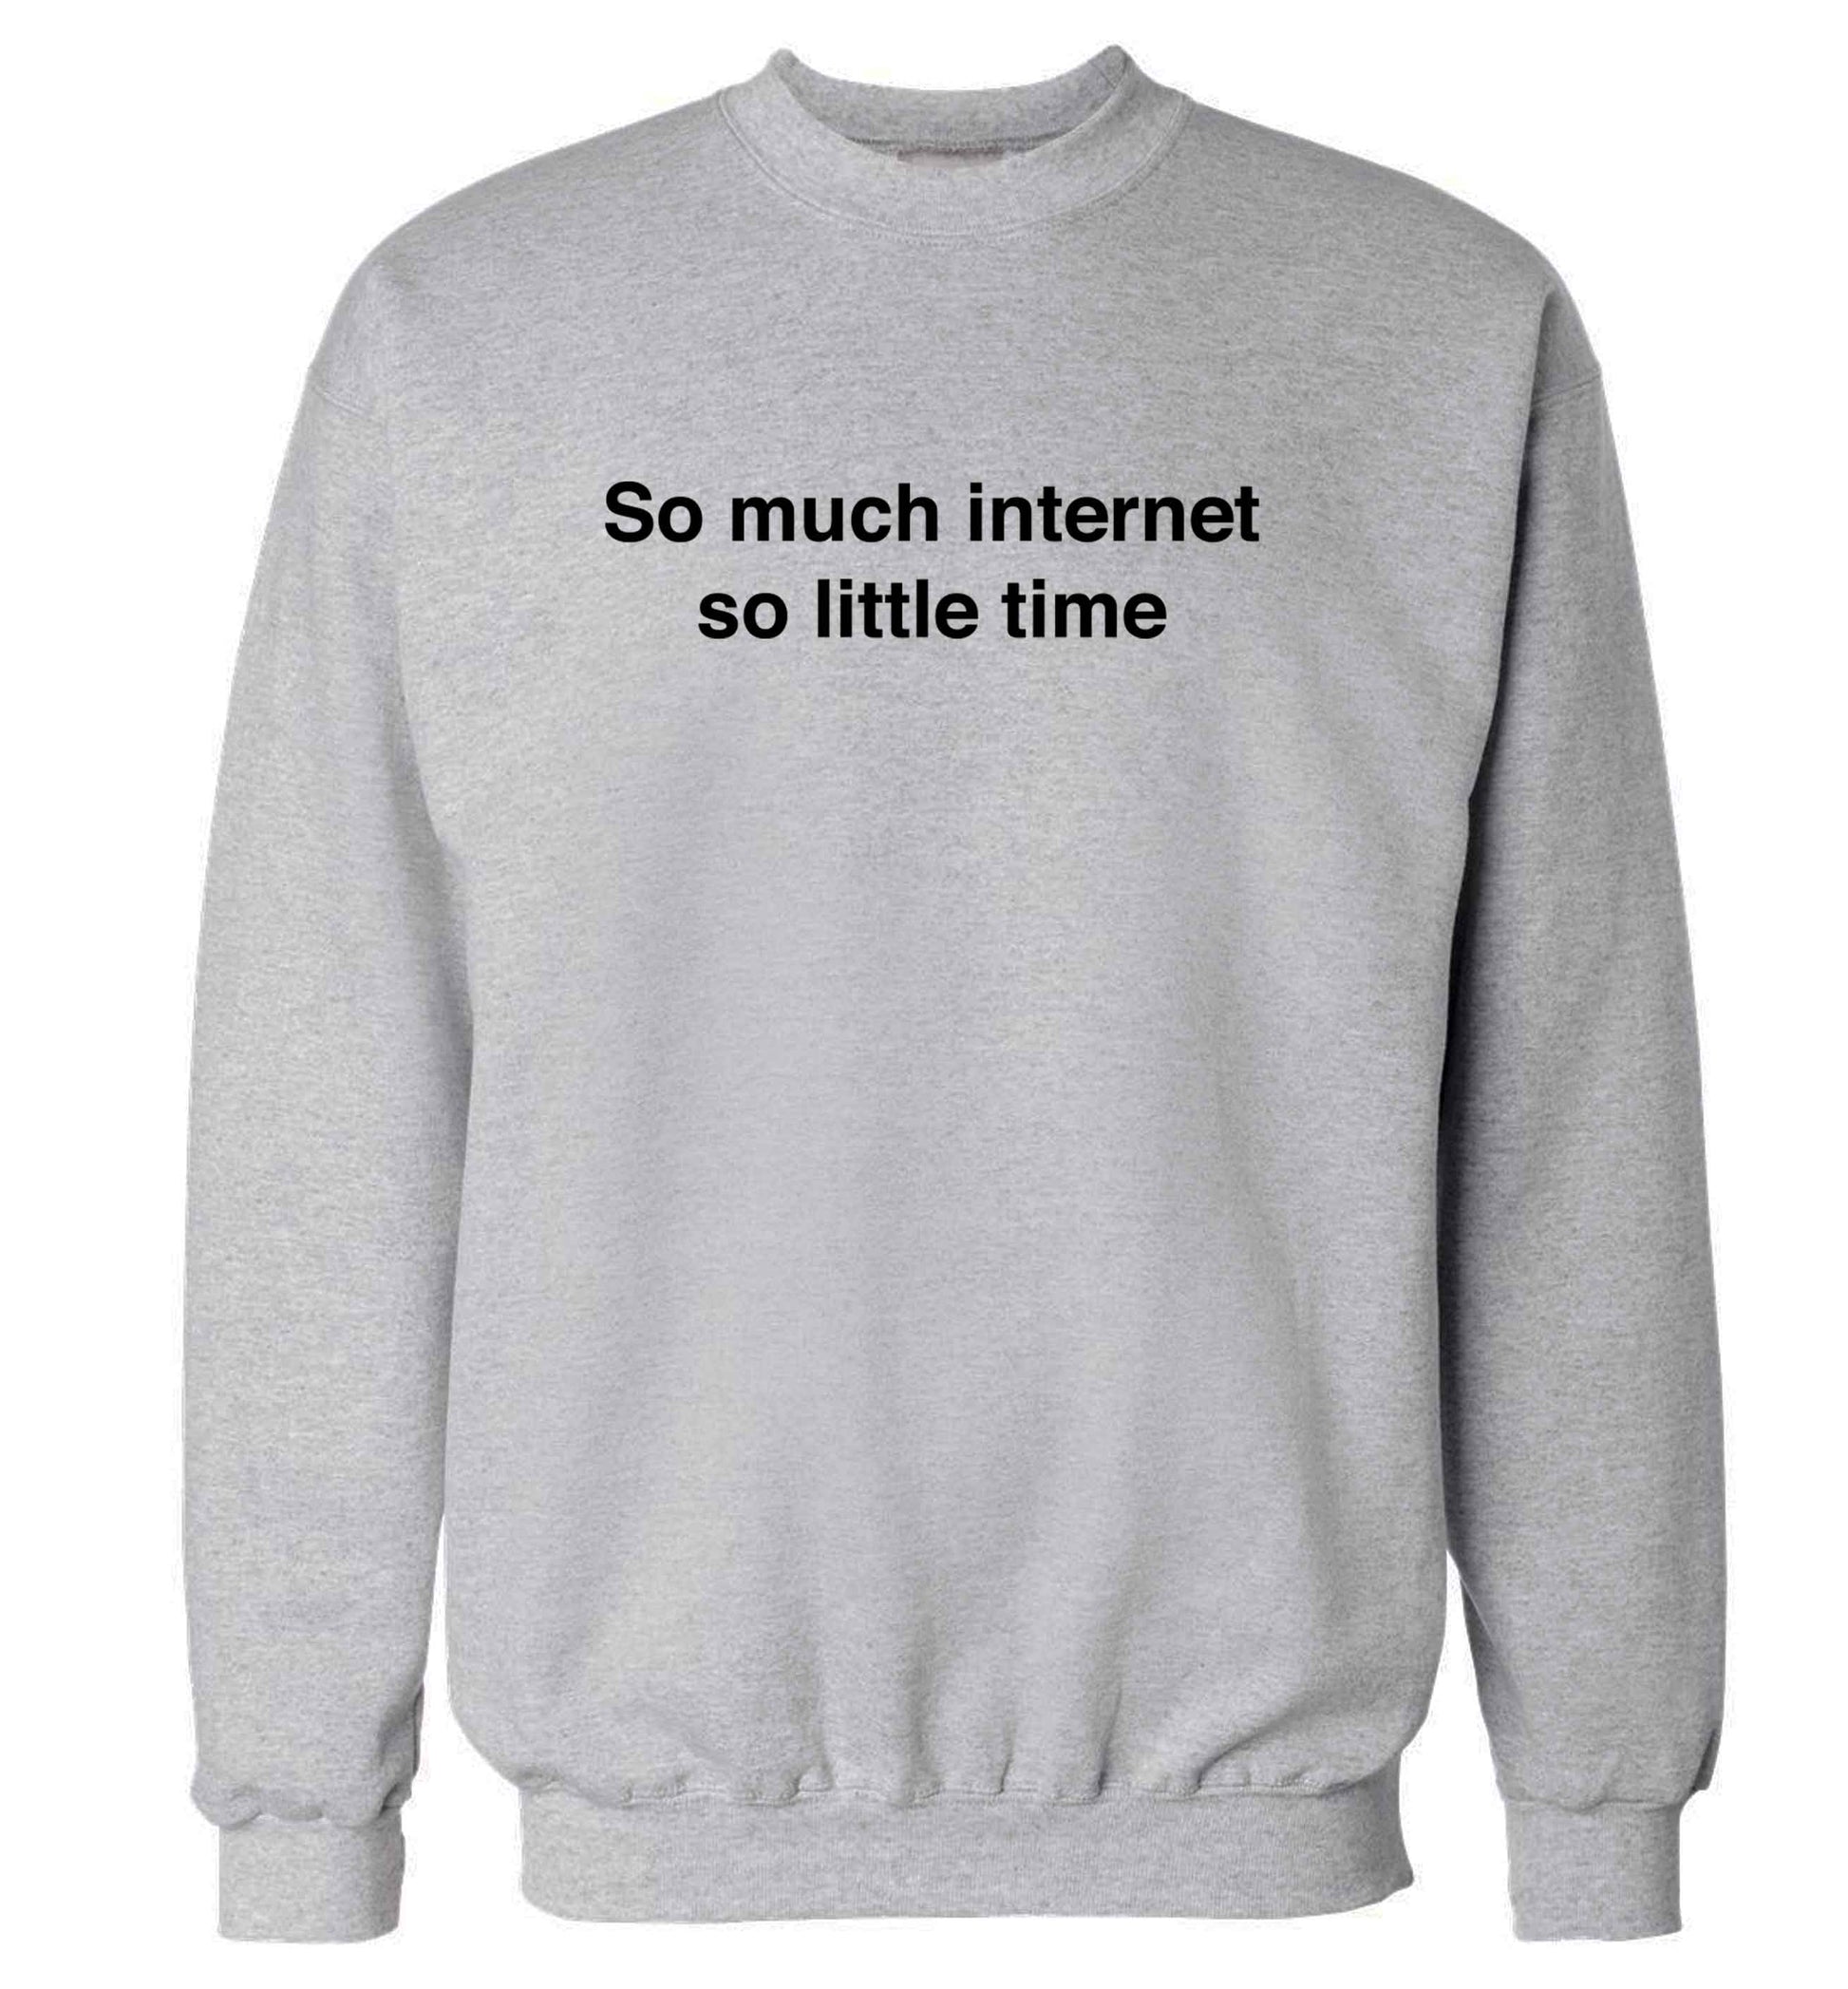 So much internet so little time adult's unisex grey sweater 2XL